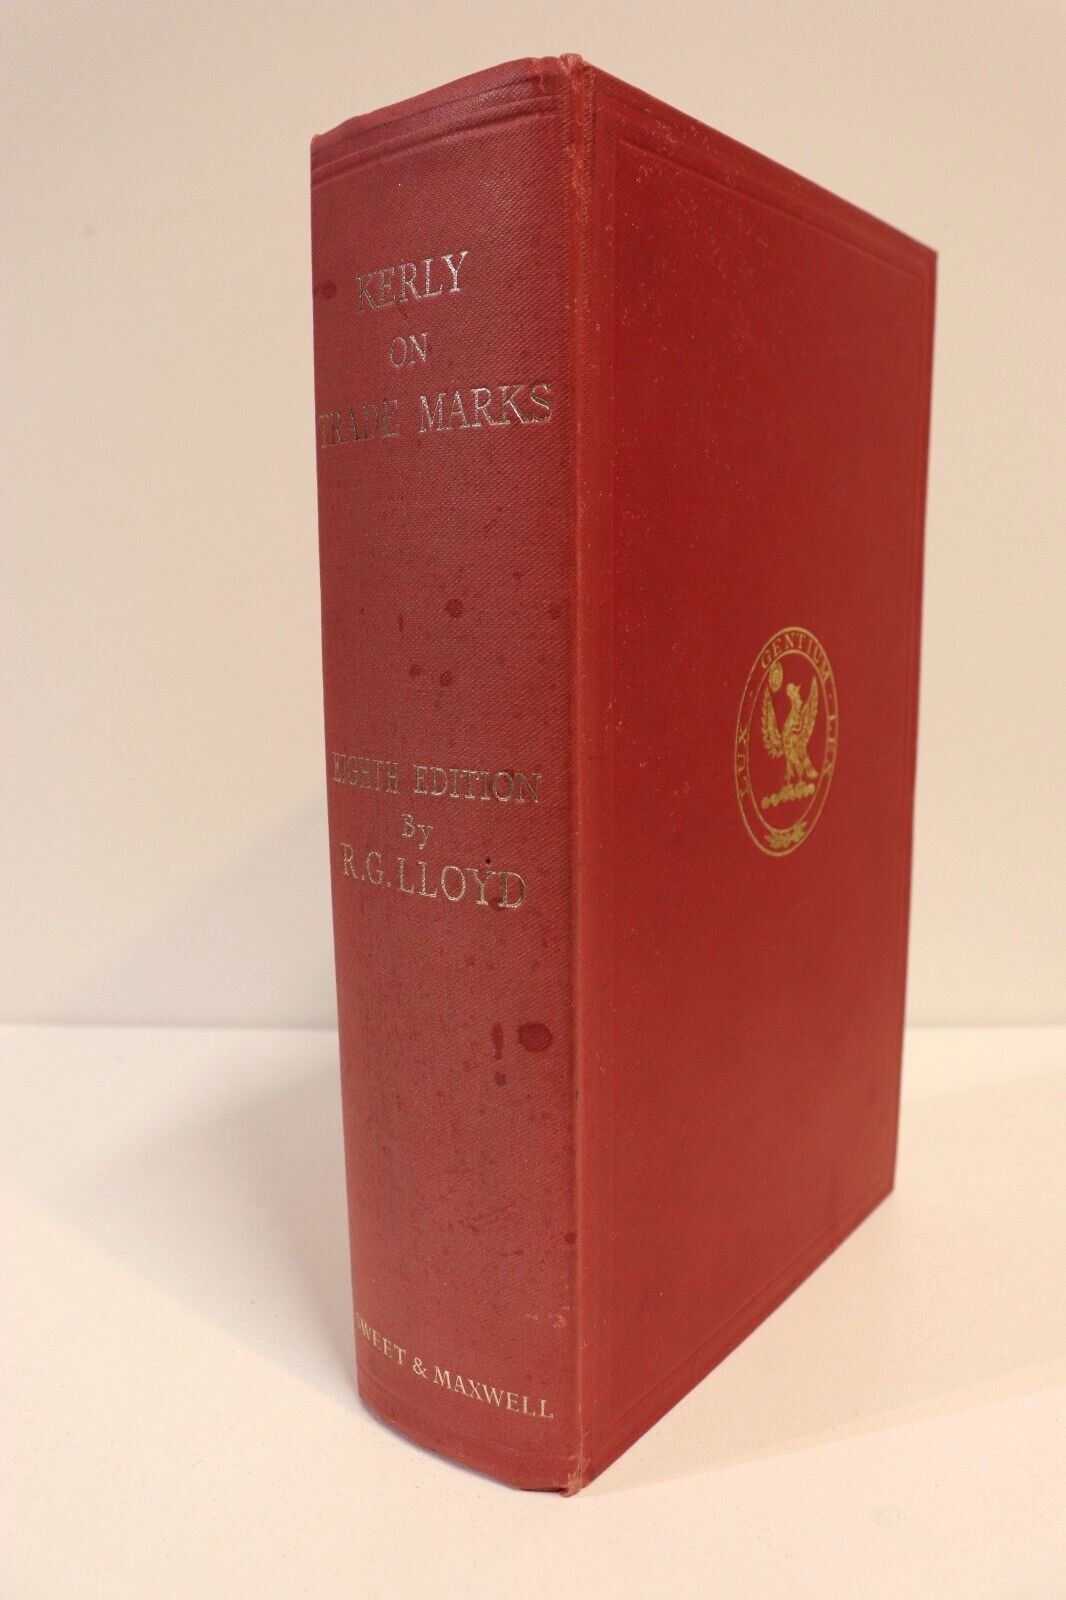 Kerly's Law Of Trade Marks & Trade Names - 1960 - Vintage Legal History Book